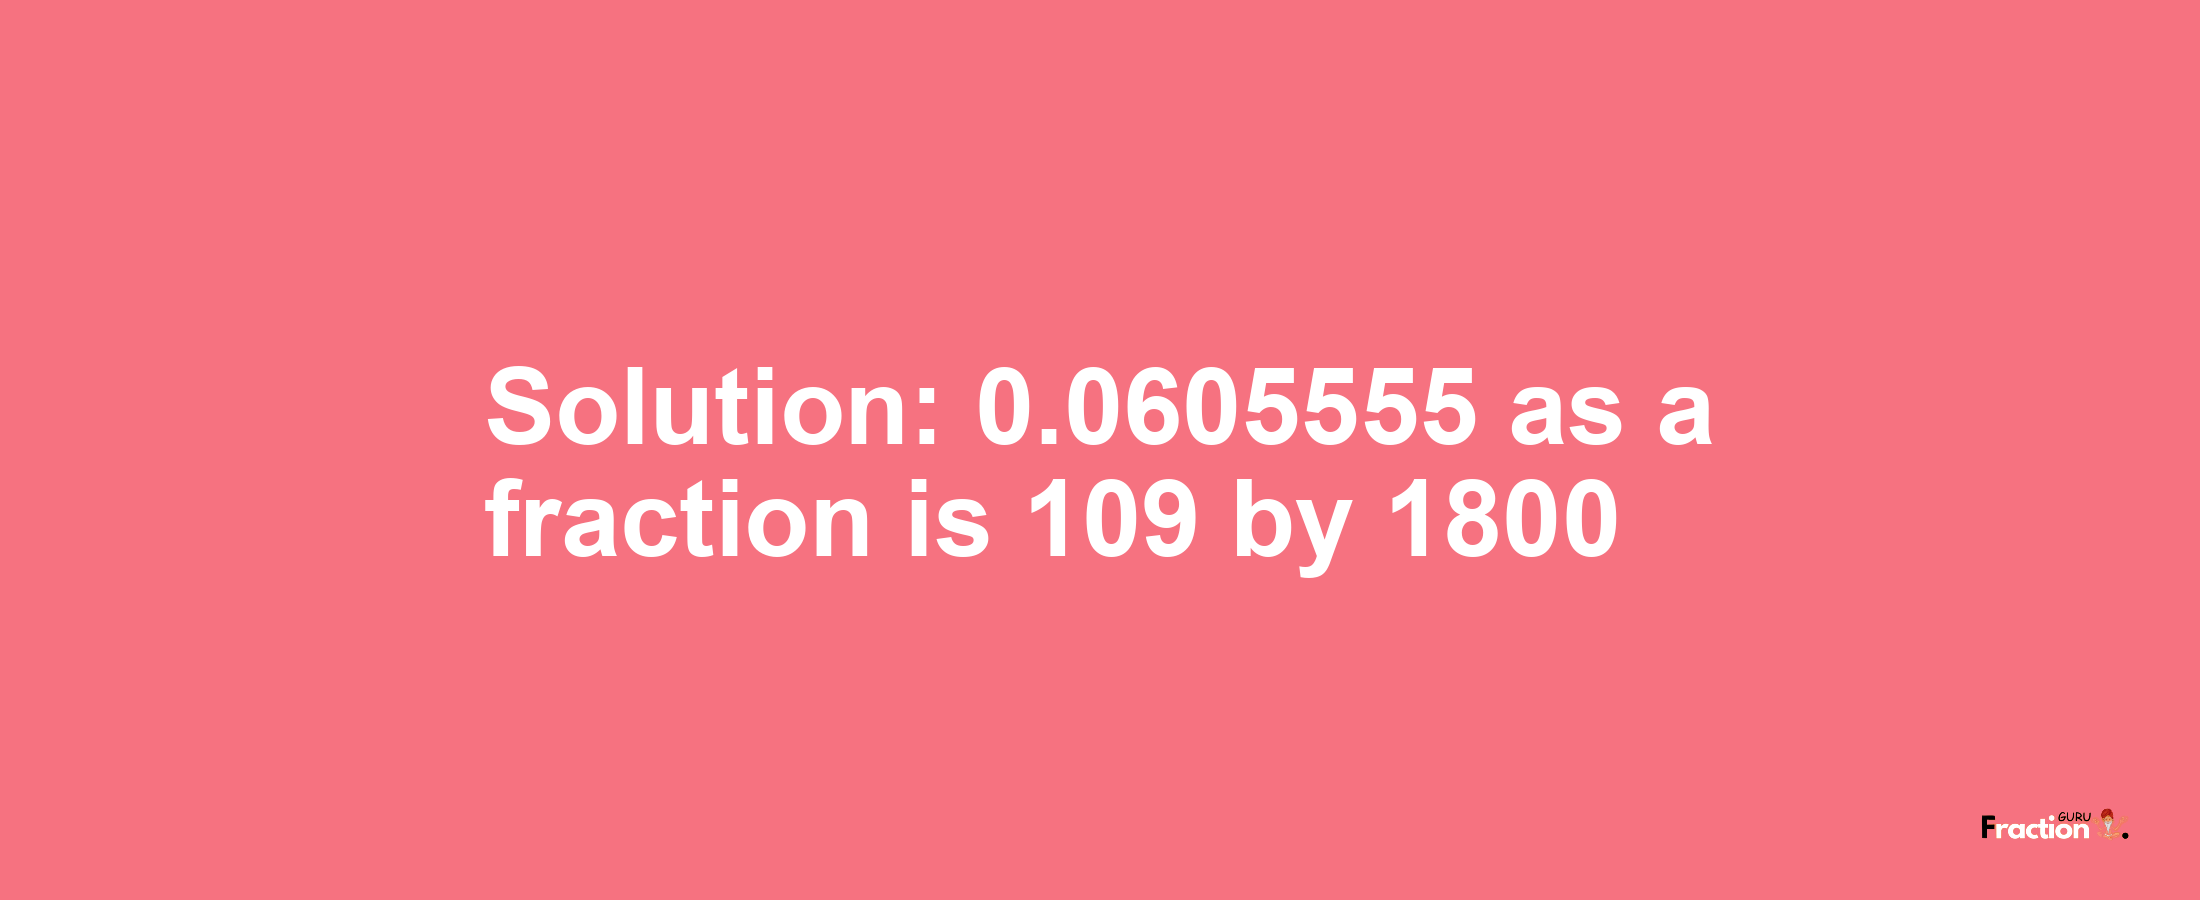 Solution:0.0605555 as a fraction is 109/1800